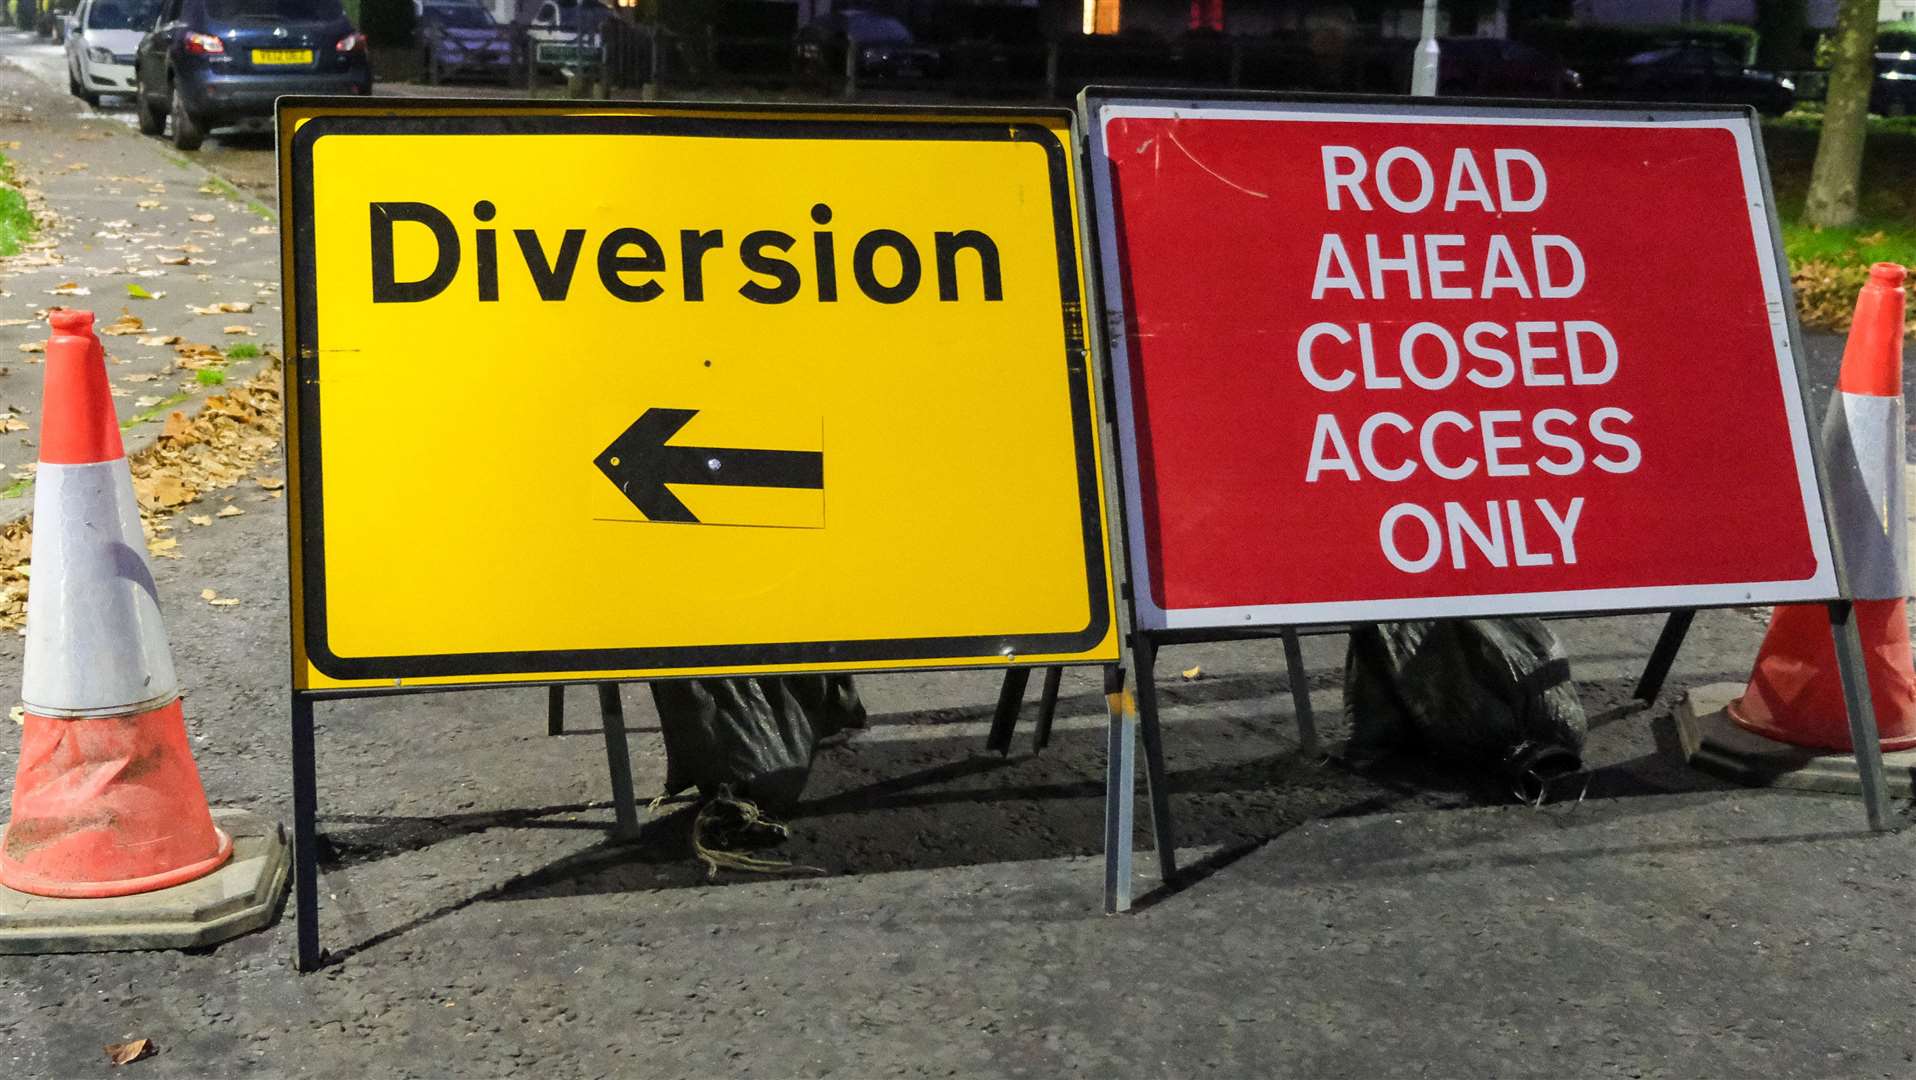 The road will be closed on December 6